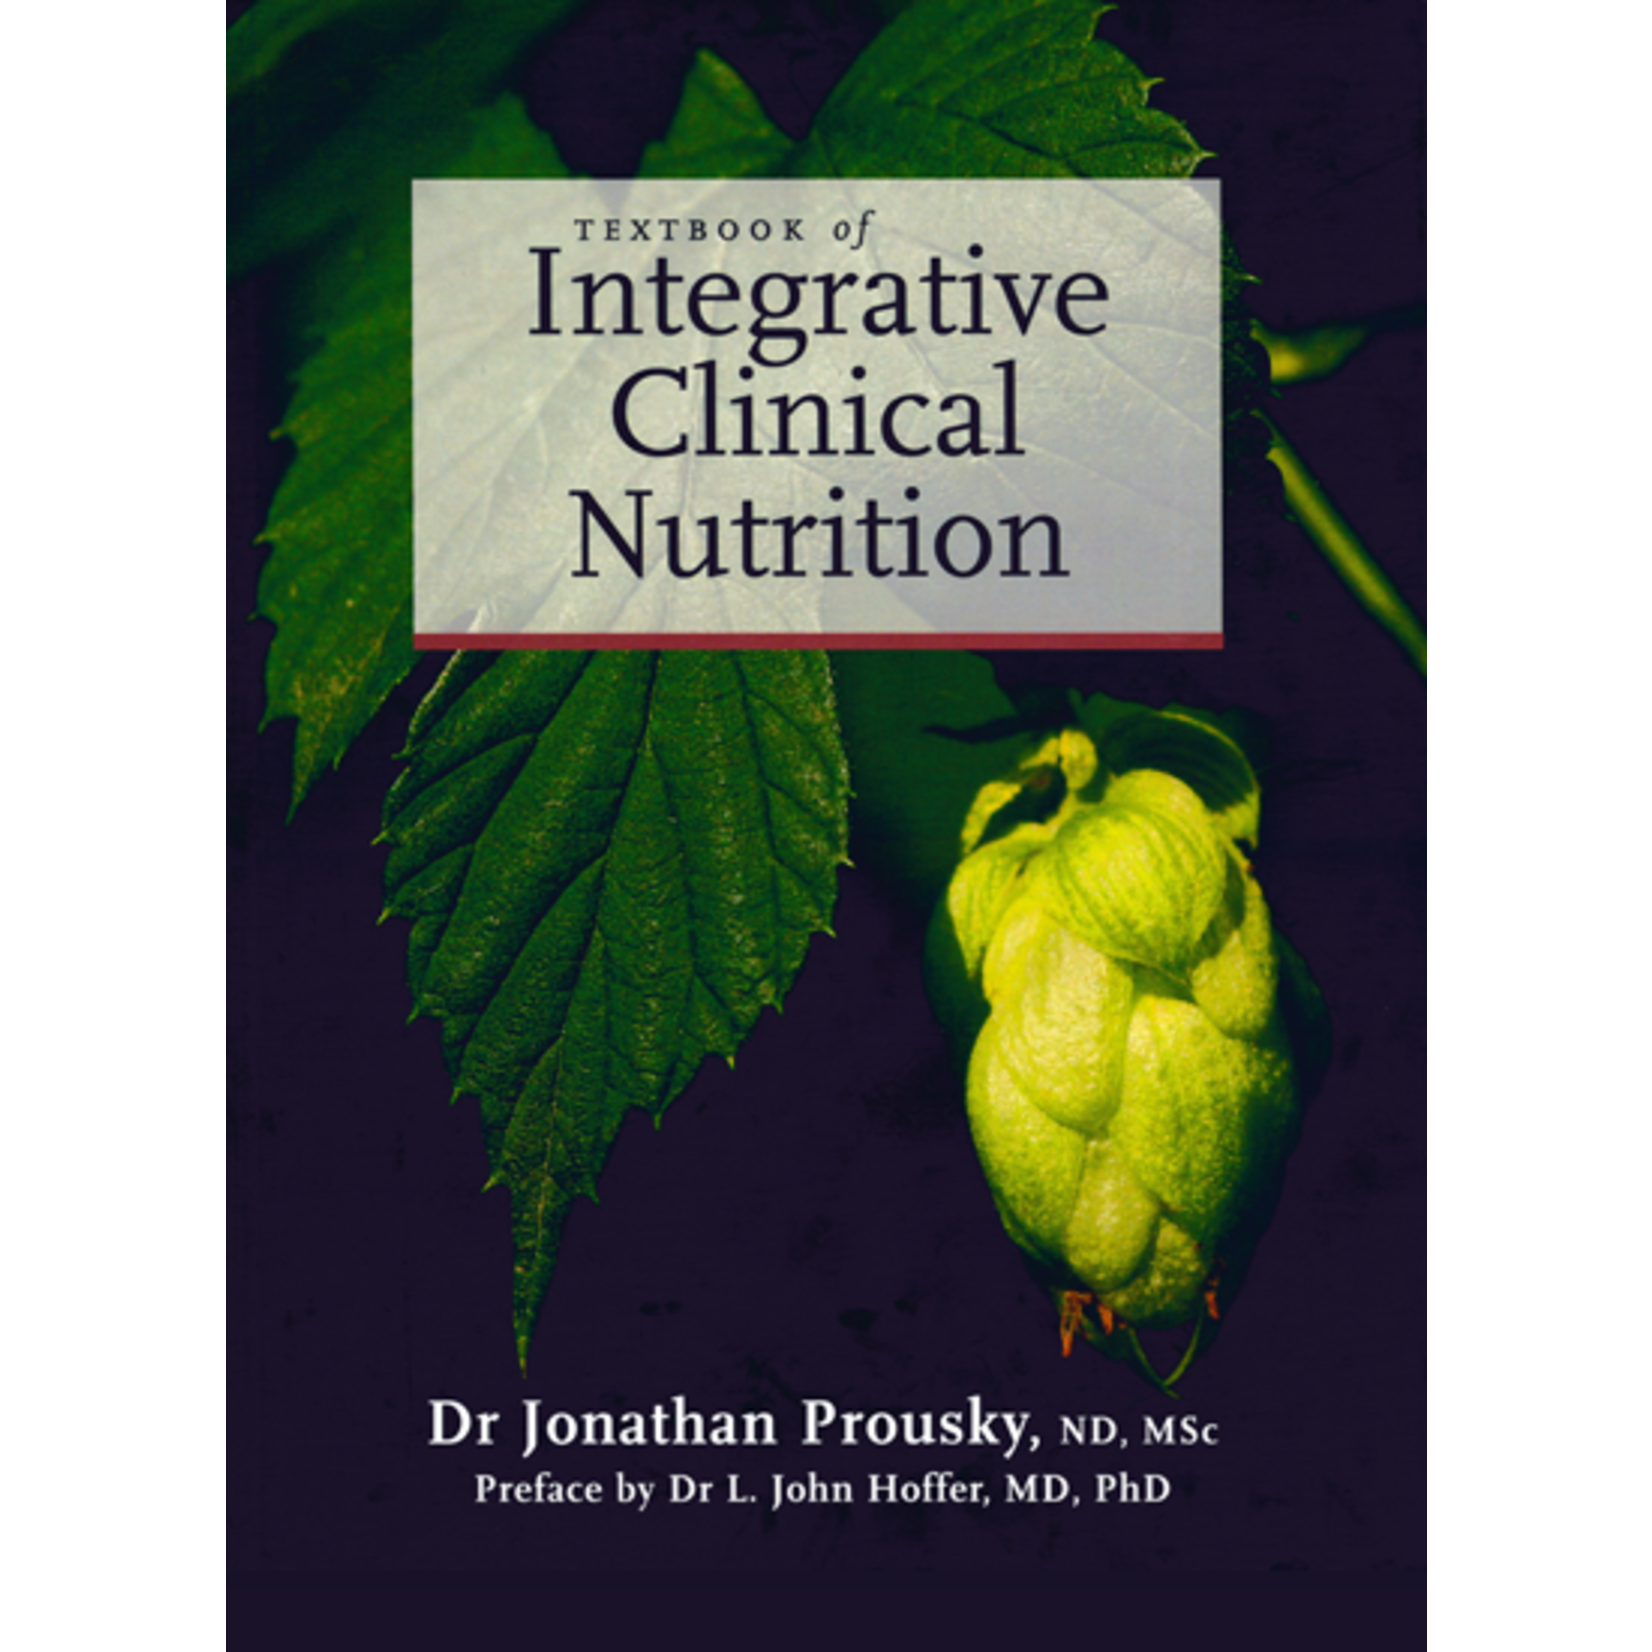 CCNM PRESS TEXTBOOK OF INTEGRATIVE CLINICAL NUTRITION